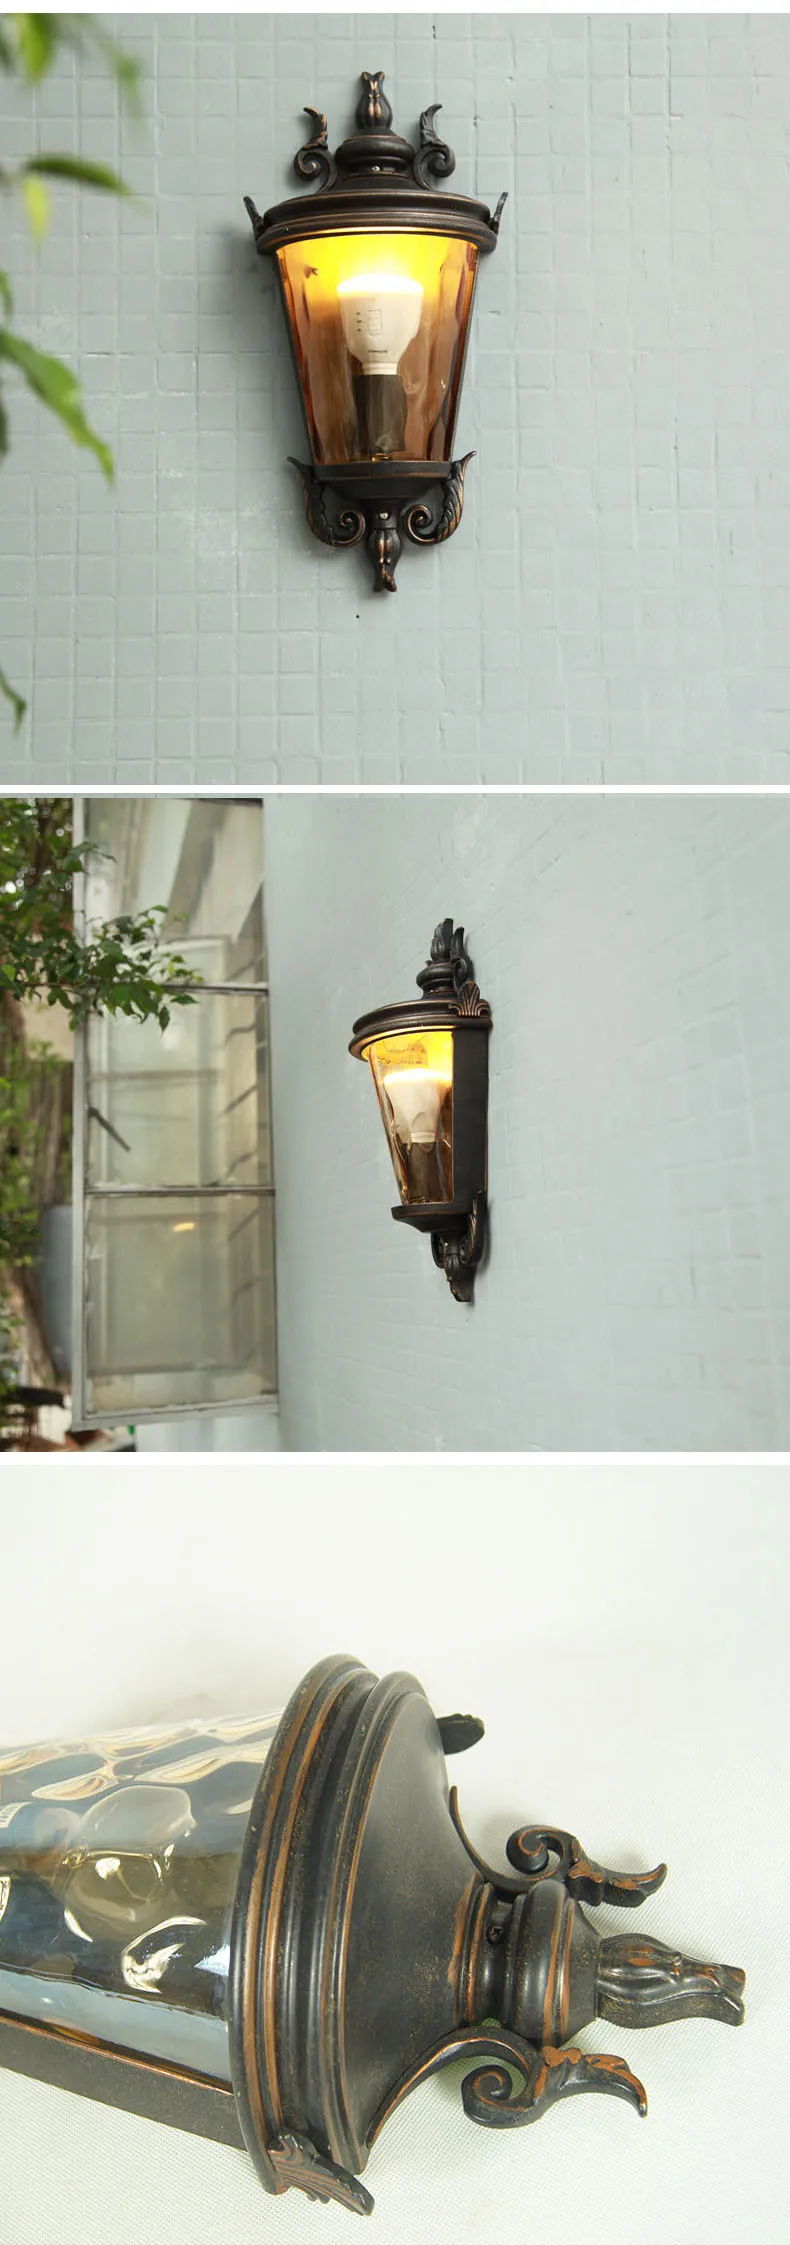 Wholesale Wall Mounted Outdoor Lights Waterproof Aluminum&Glass Vintage LED Outdoor Wall Lamps